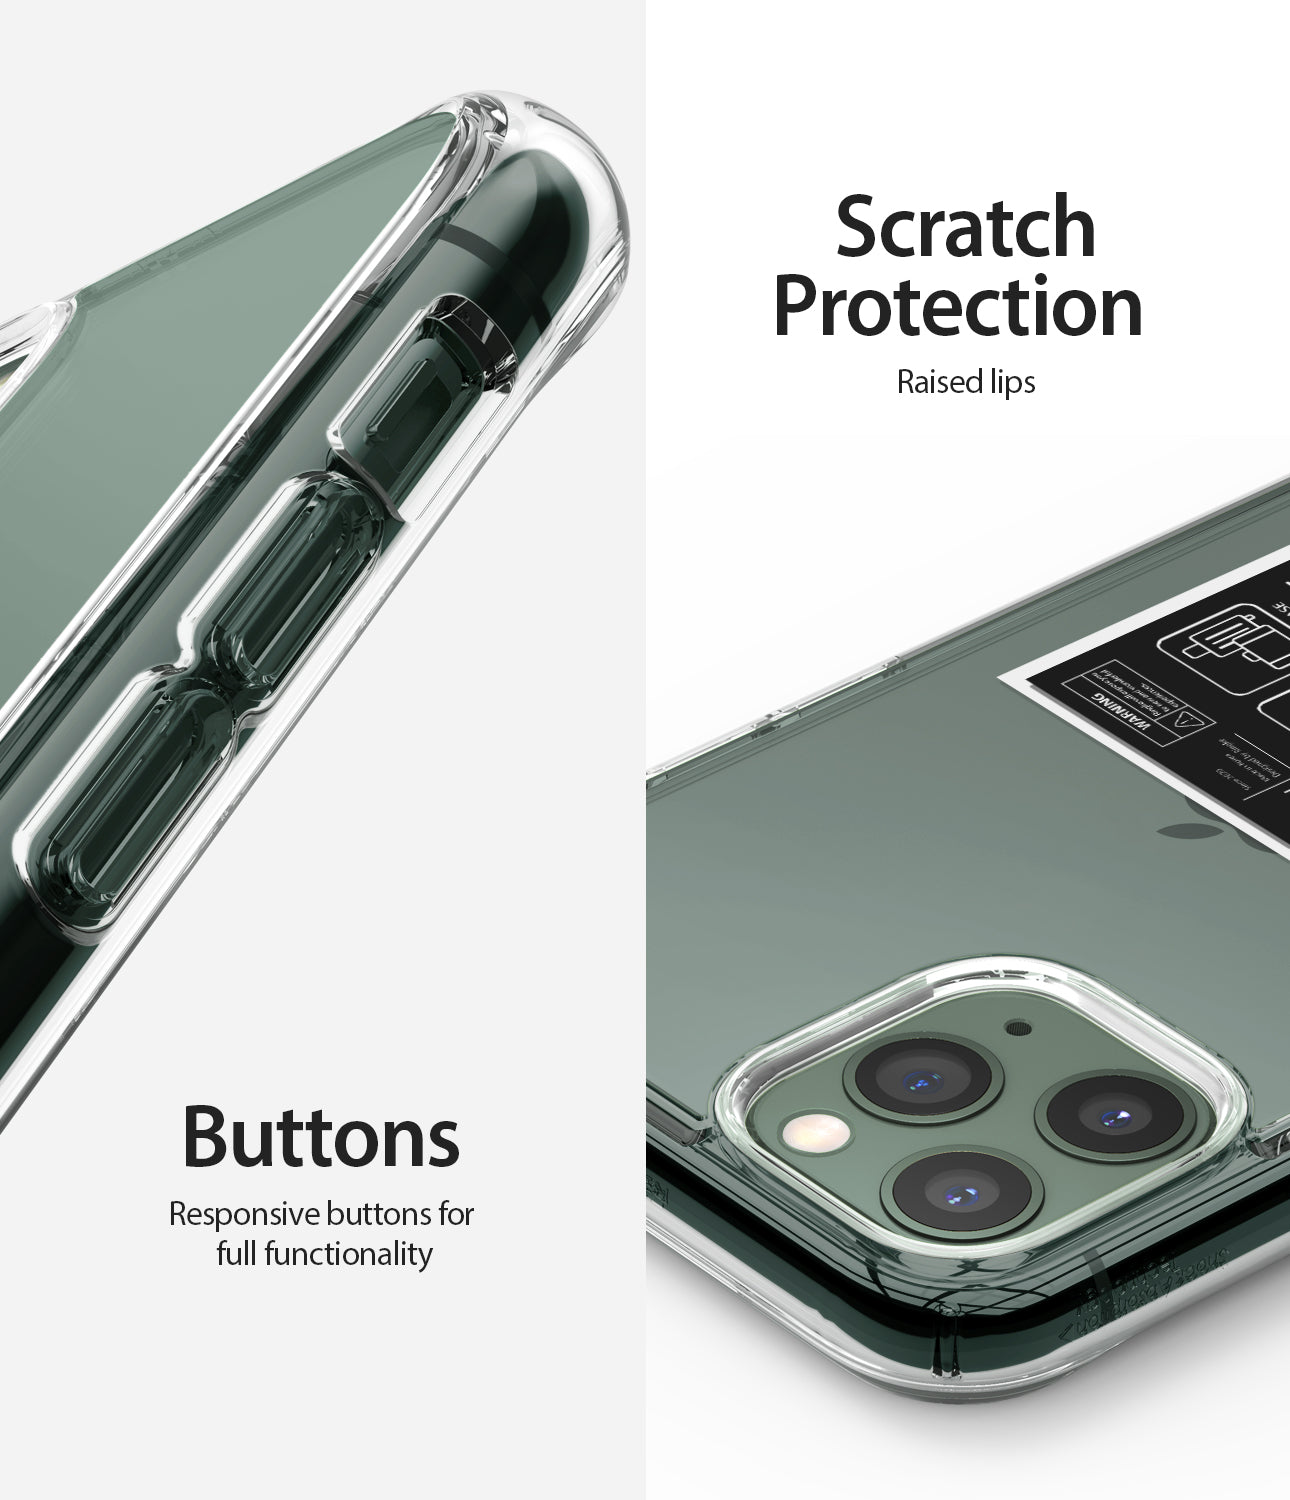 scratch protection with raised lips / responsive buttons